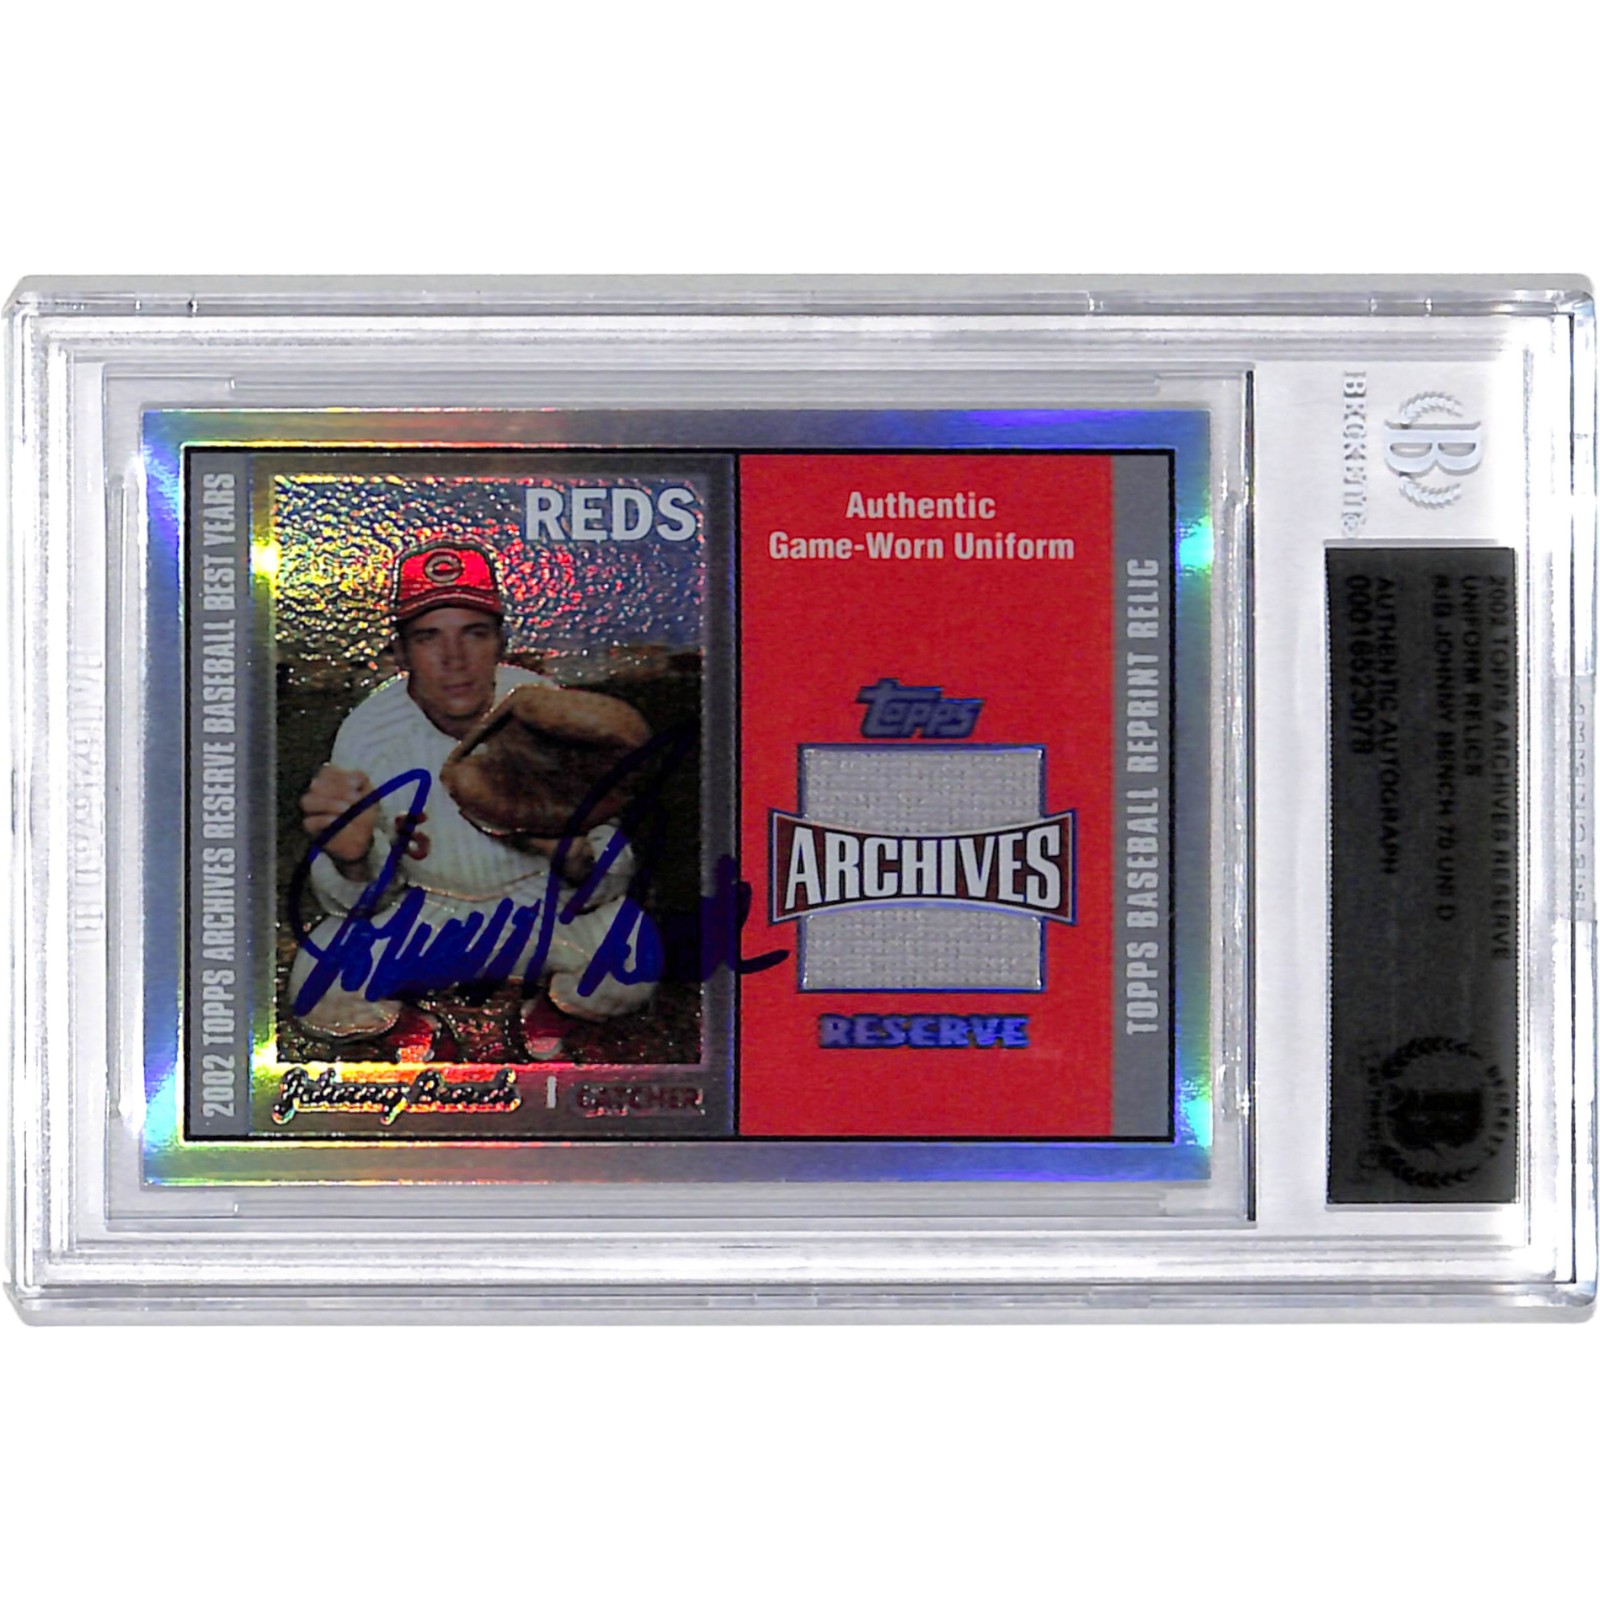 Johnny Bench Signed 2002 Topps Archive Relic Trading Card BAS 44543